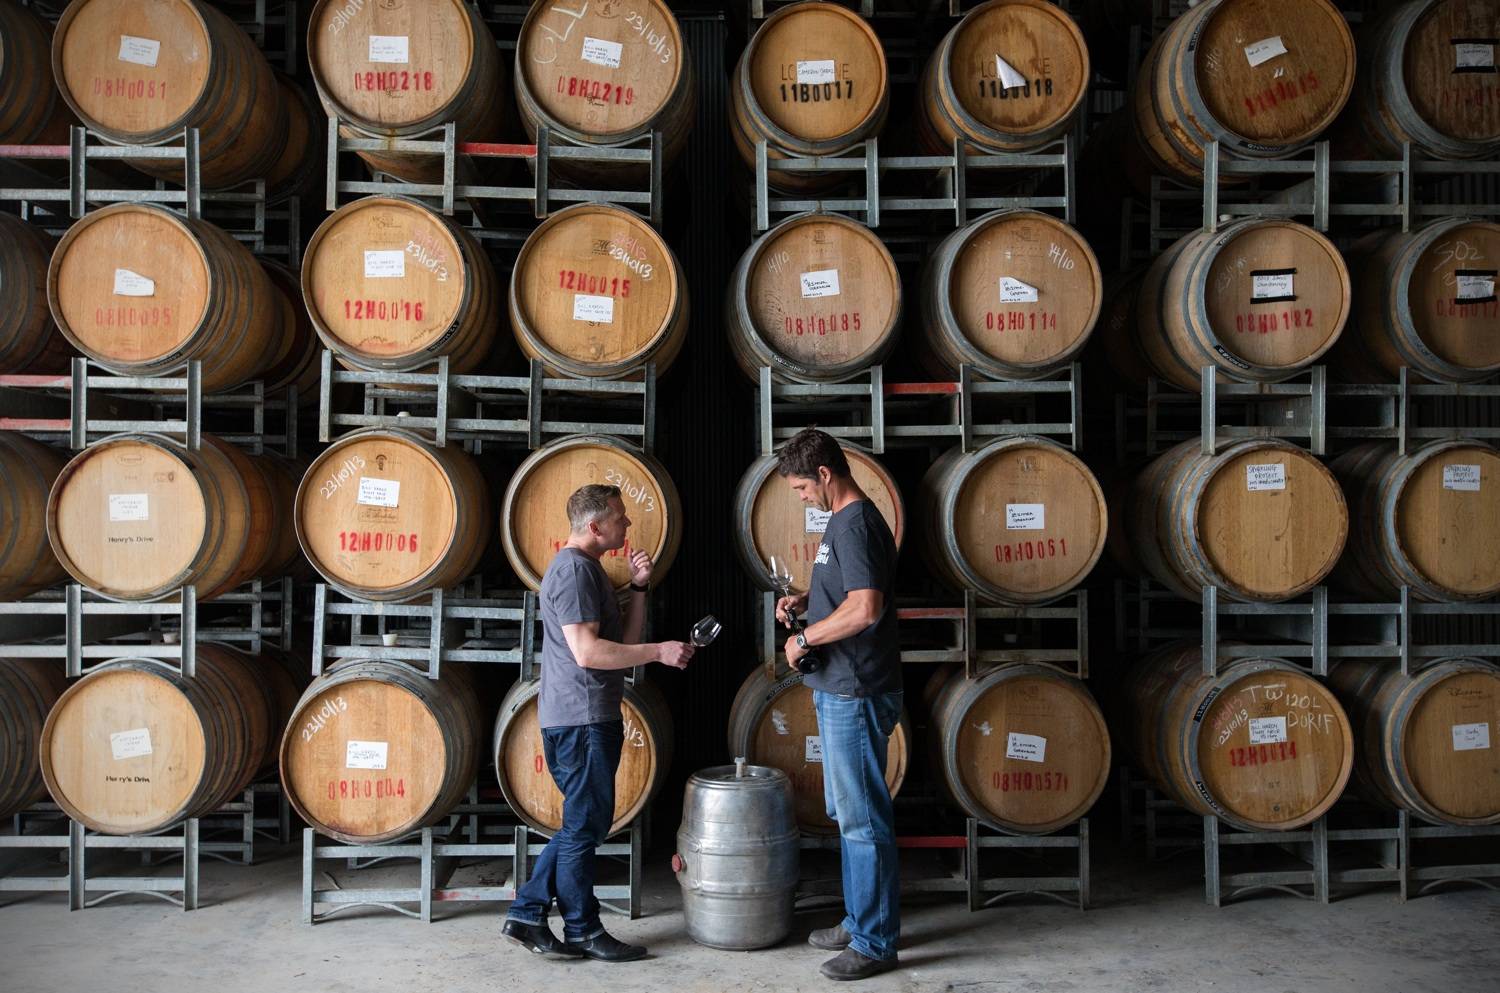 Andrew Baker and Steve Grimley talking in front of barrels of wine